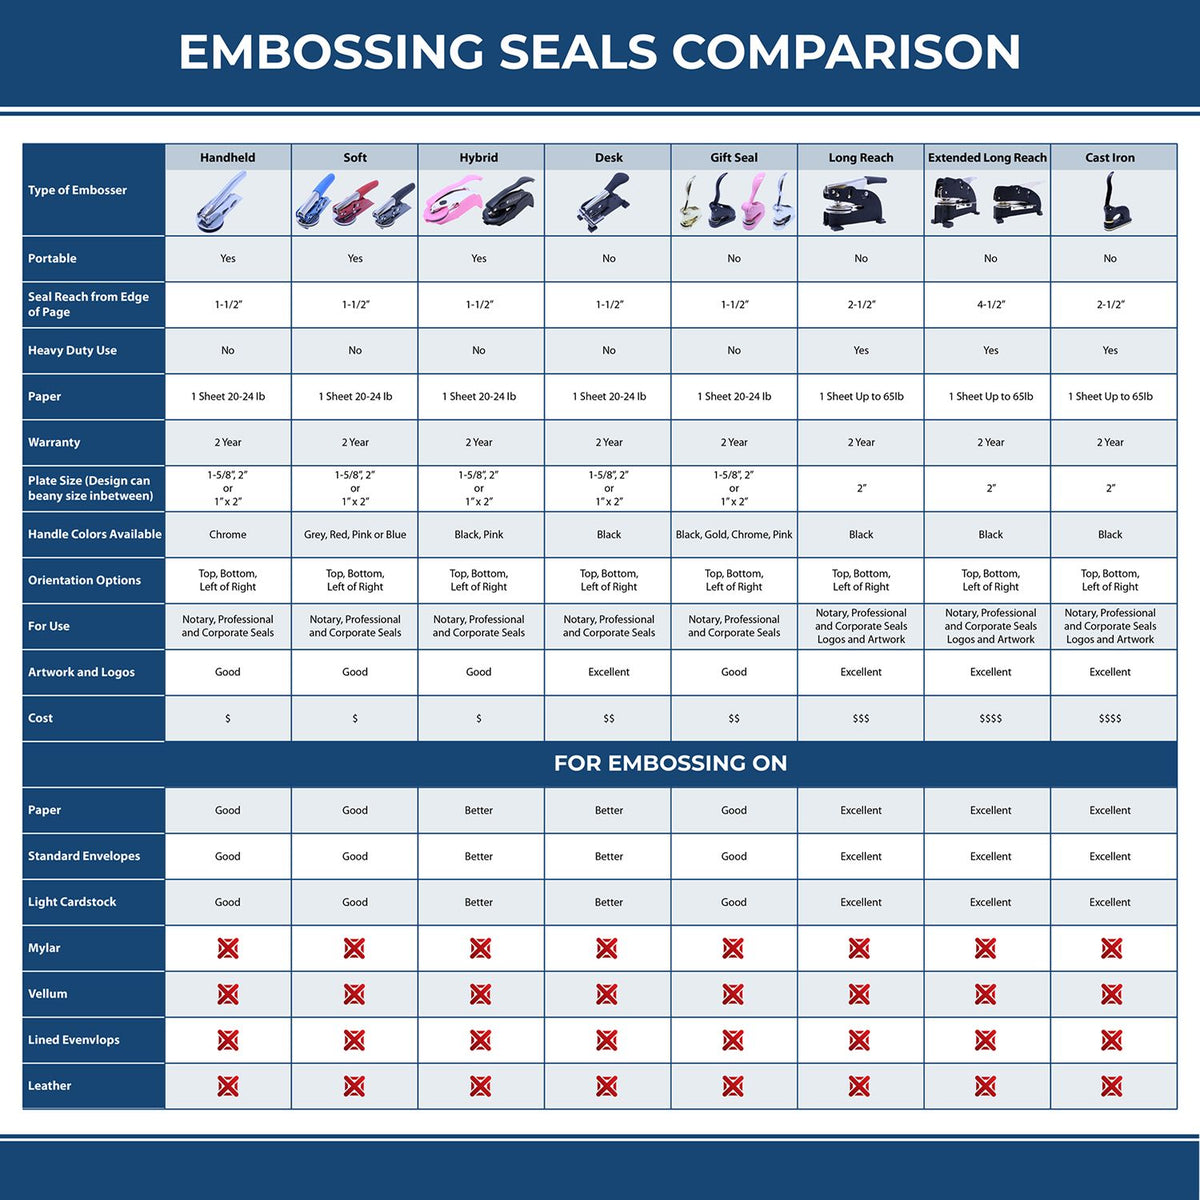 A comparison chart for the different types of mount models available for the Heavy Duty Cast Iron Arkansas Land Surveyor Seal Embosser.